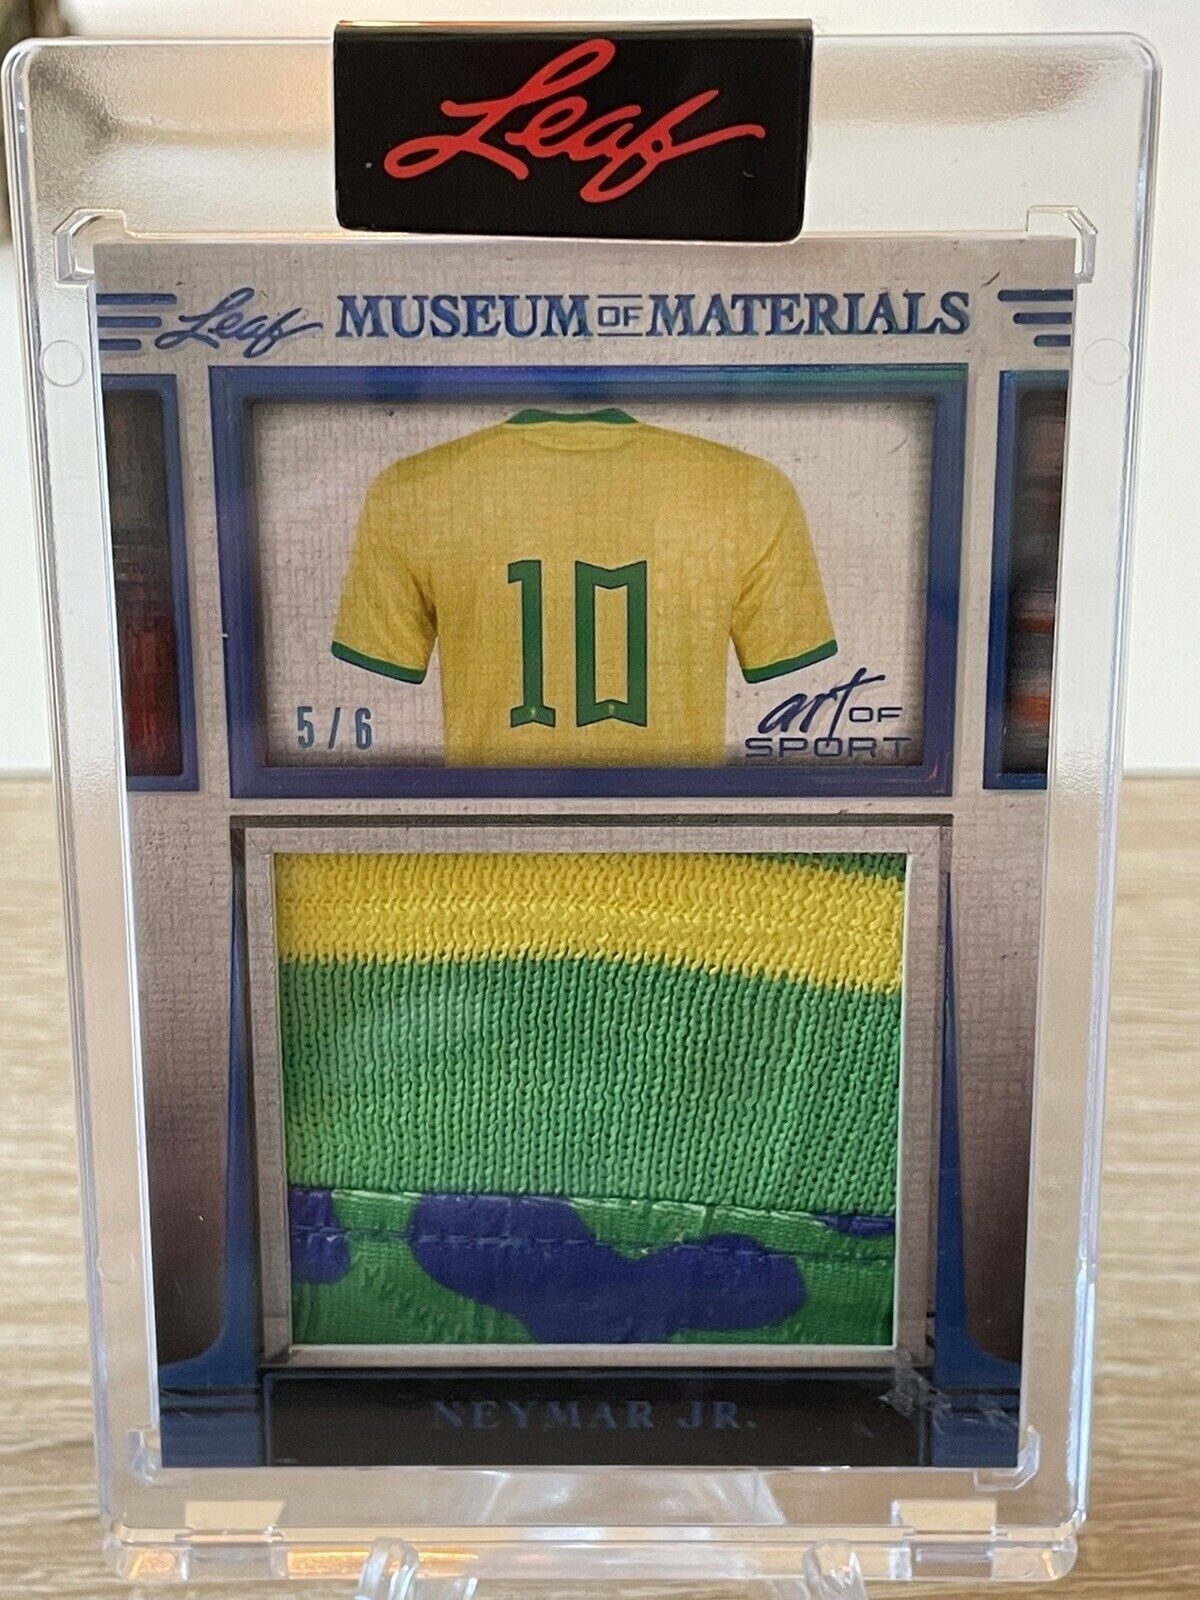 2023 Leaf Museum Of Materials Art Of Sport Neymar Jr Game Used Patch /6 #MM-18